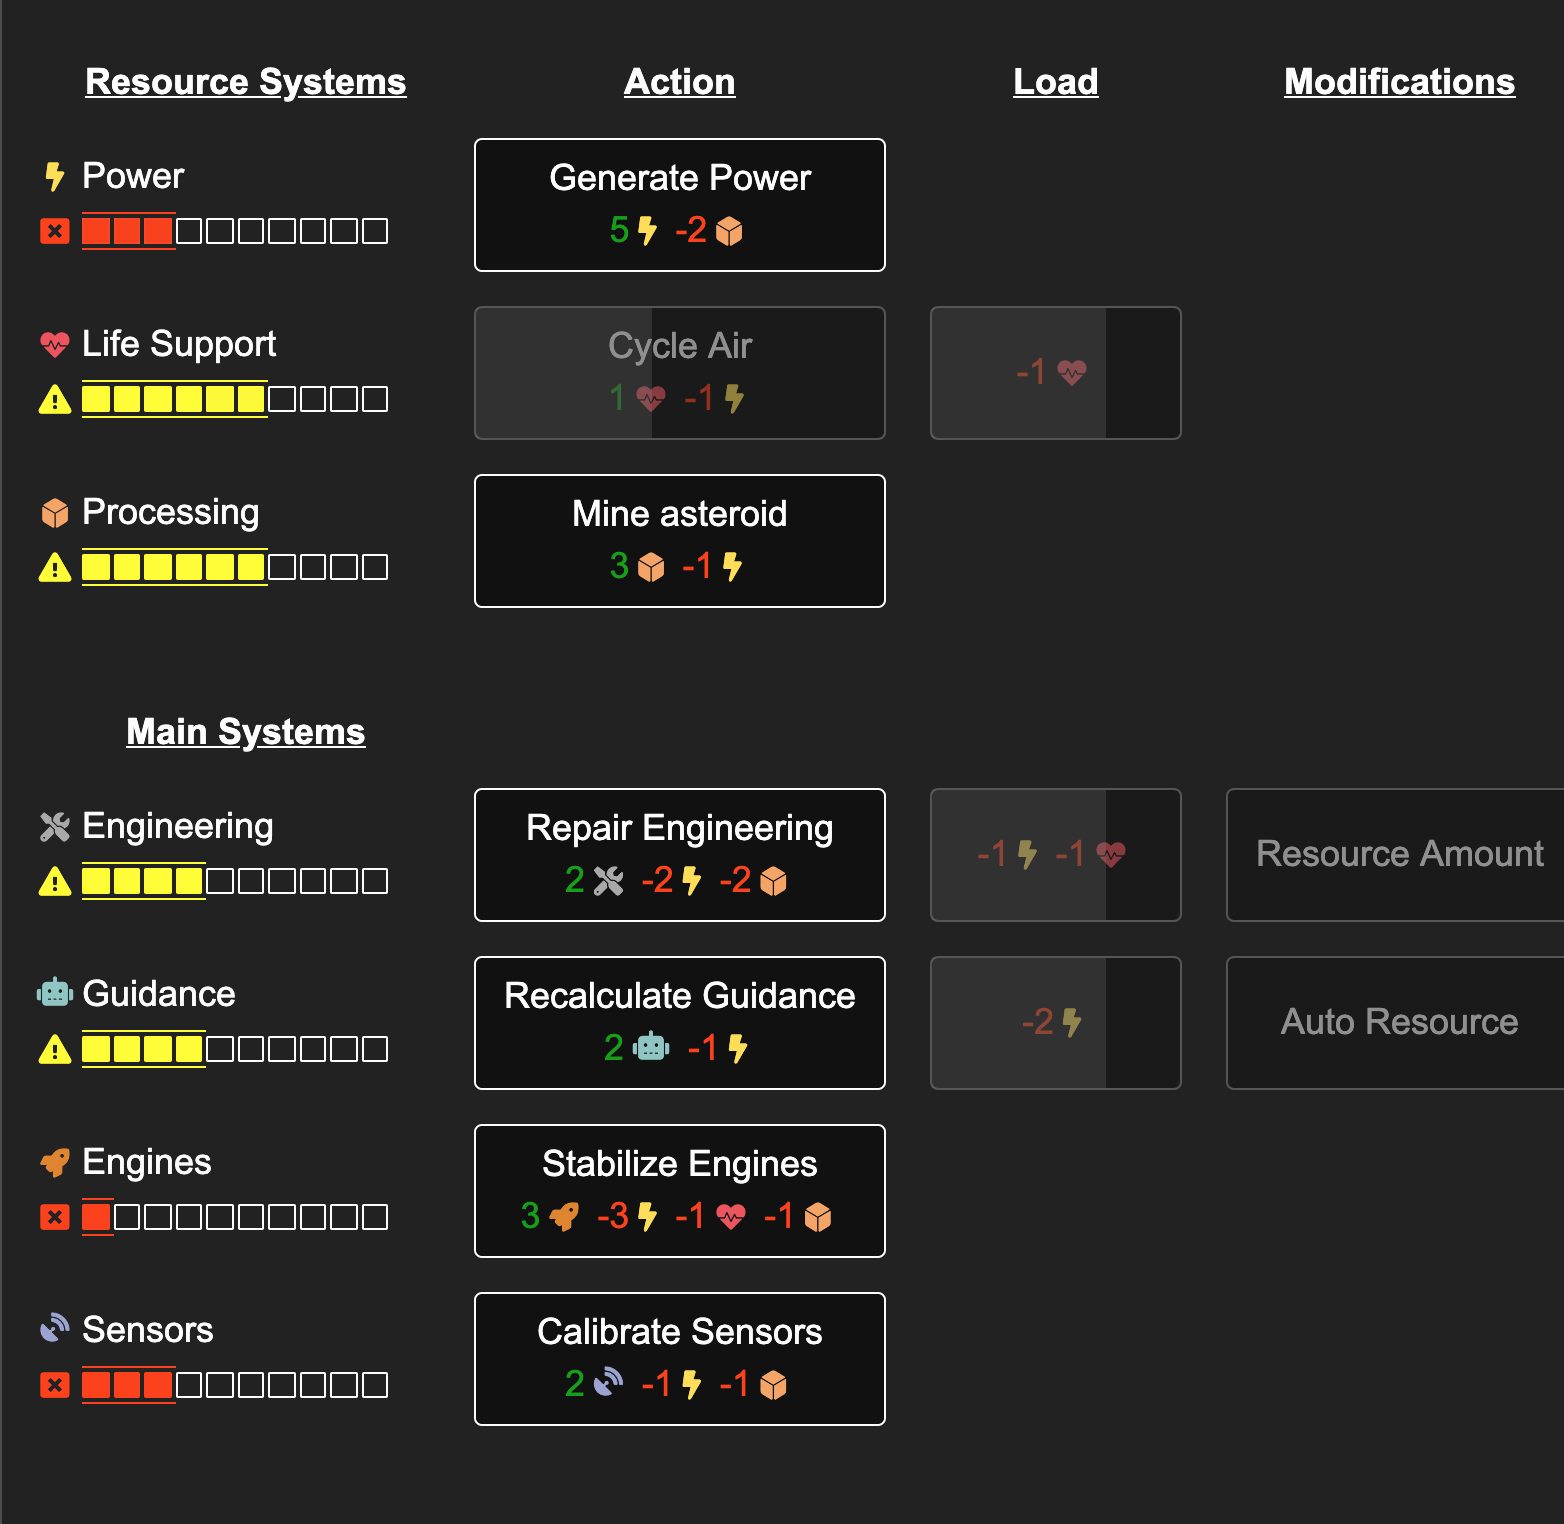 A condensed layout with a single table which describes the status of each system, each action with it's associated cost, and system load